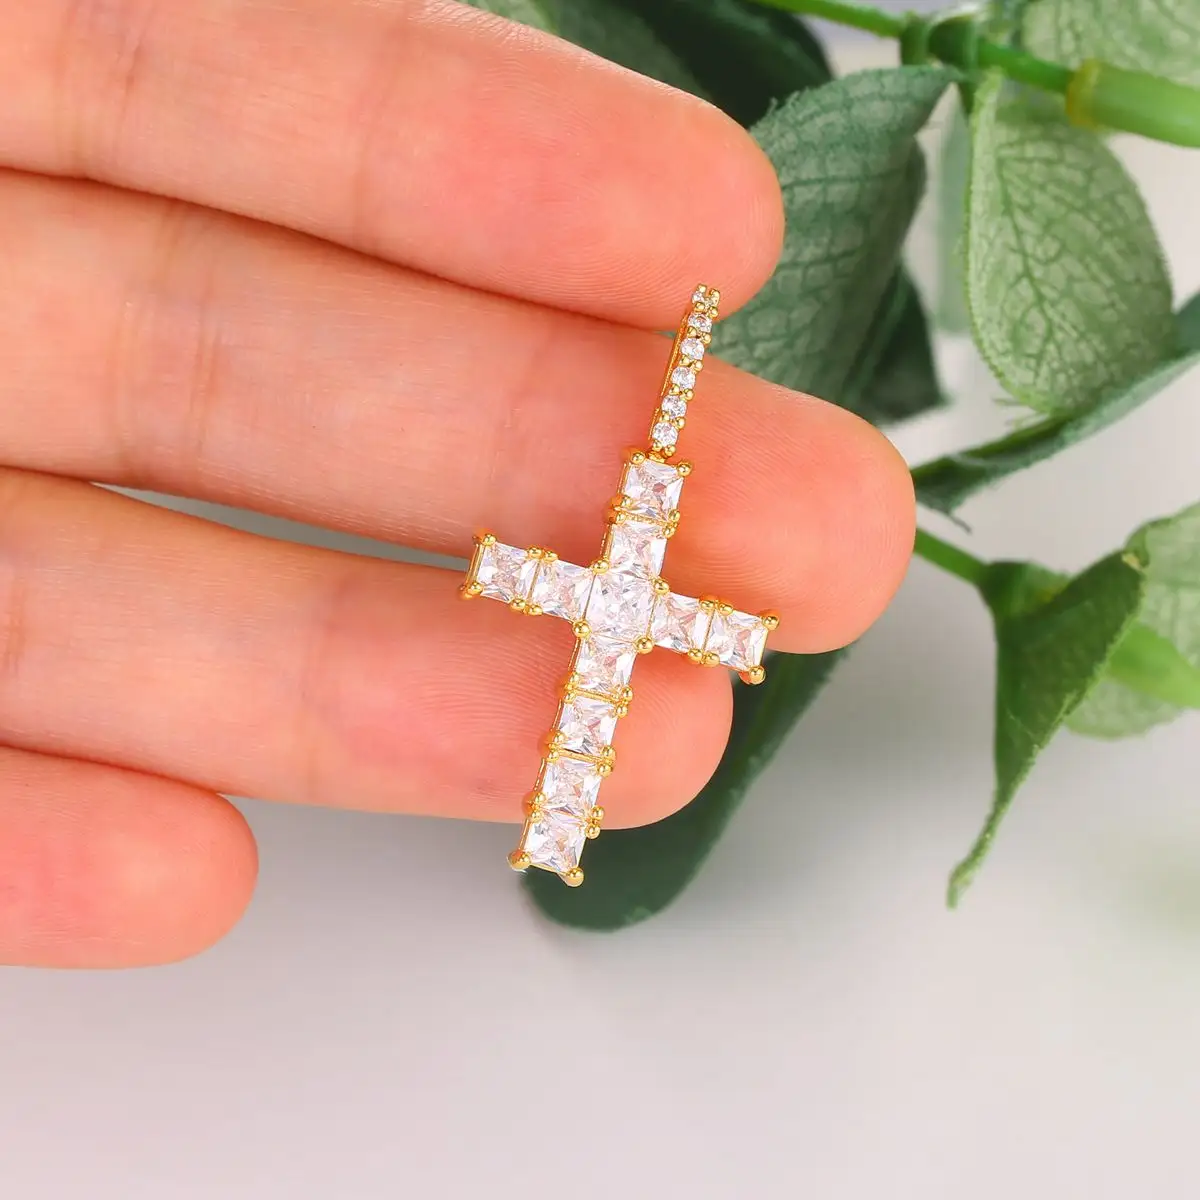 Exquisite 18K Gold Religion Cross Pendant With 3A Cubic Zirconia Mariner Chain Necklace For Men For Women